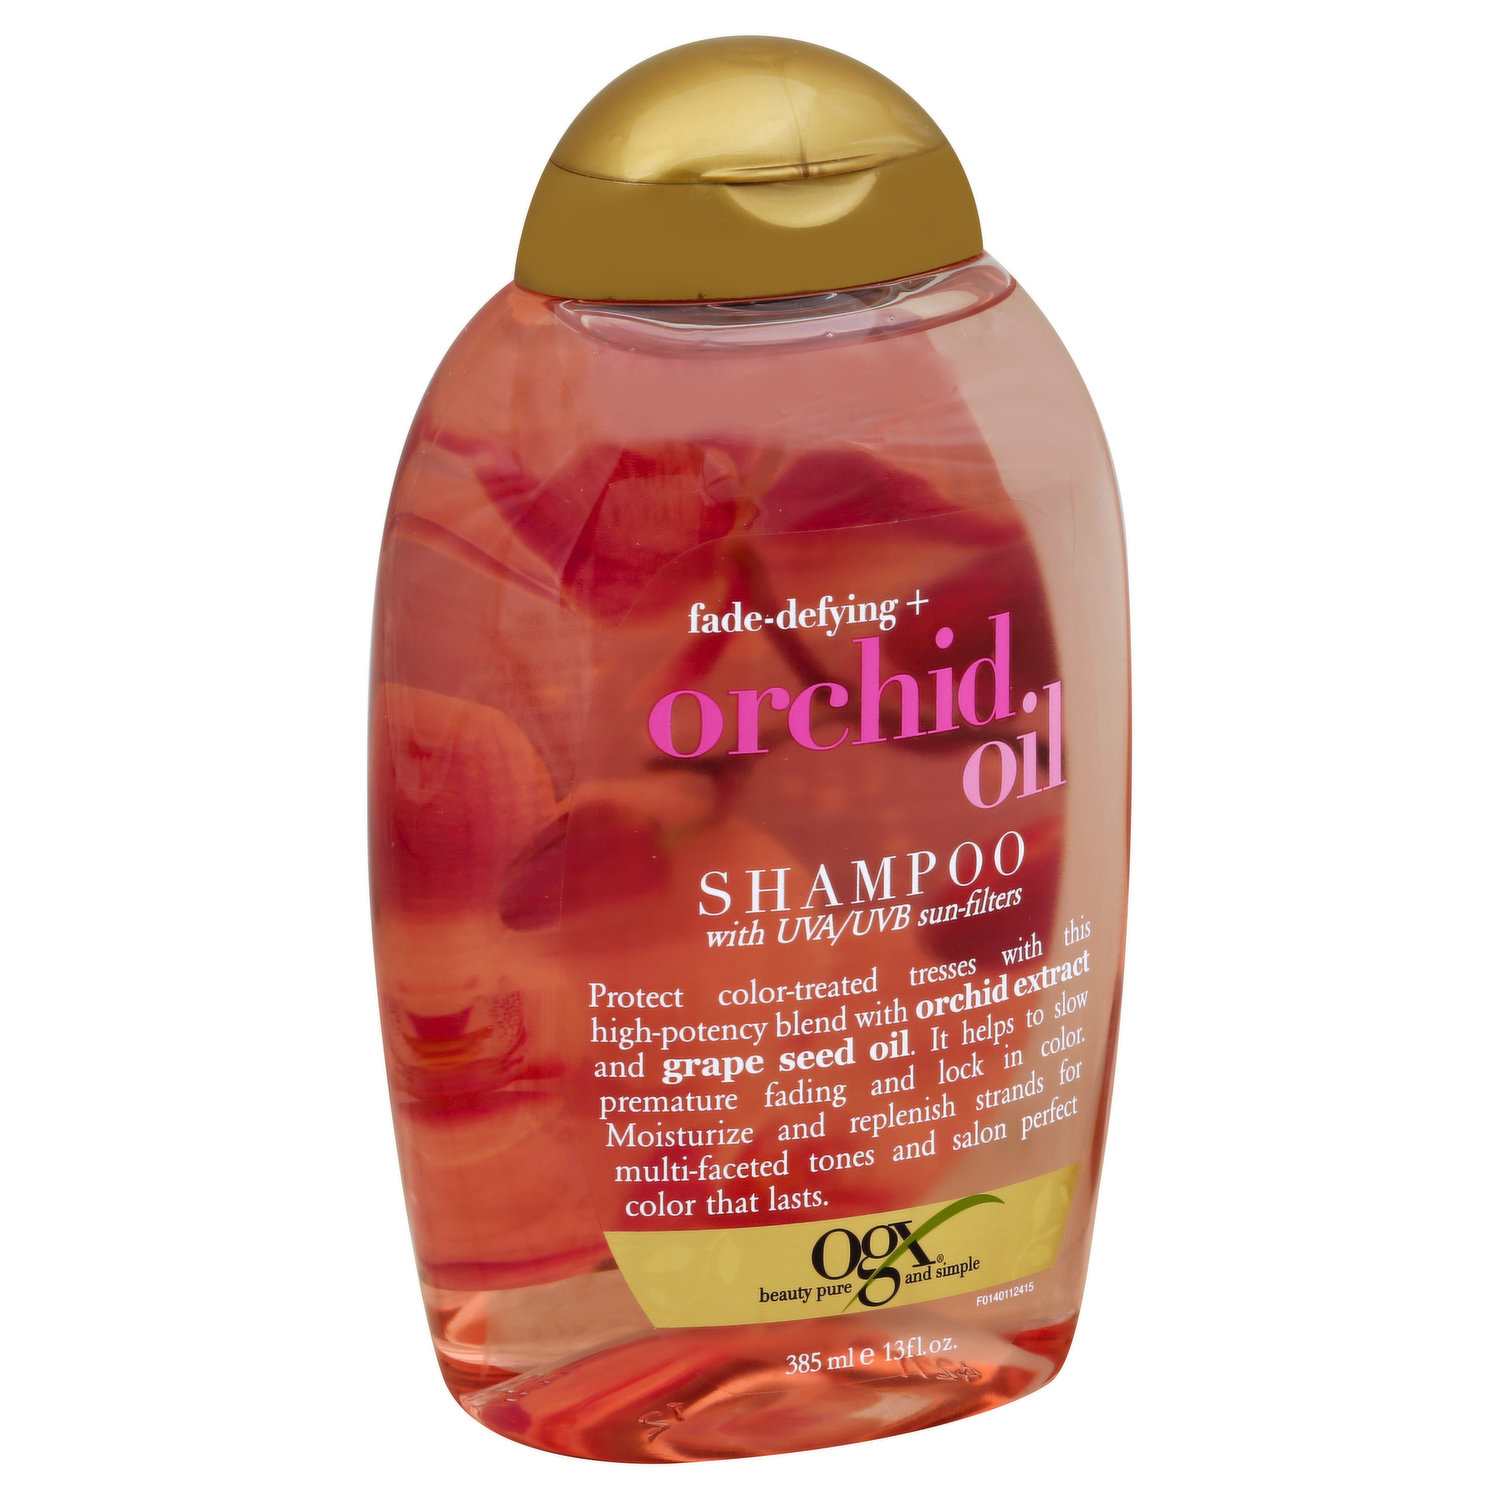 OGX Shampoo, Face-Defying + Orchid Oil